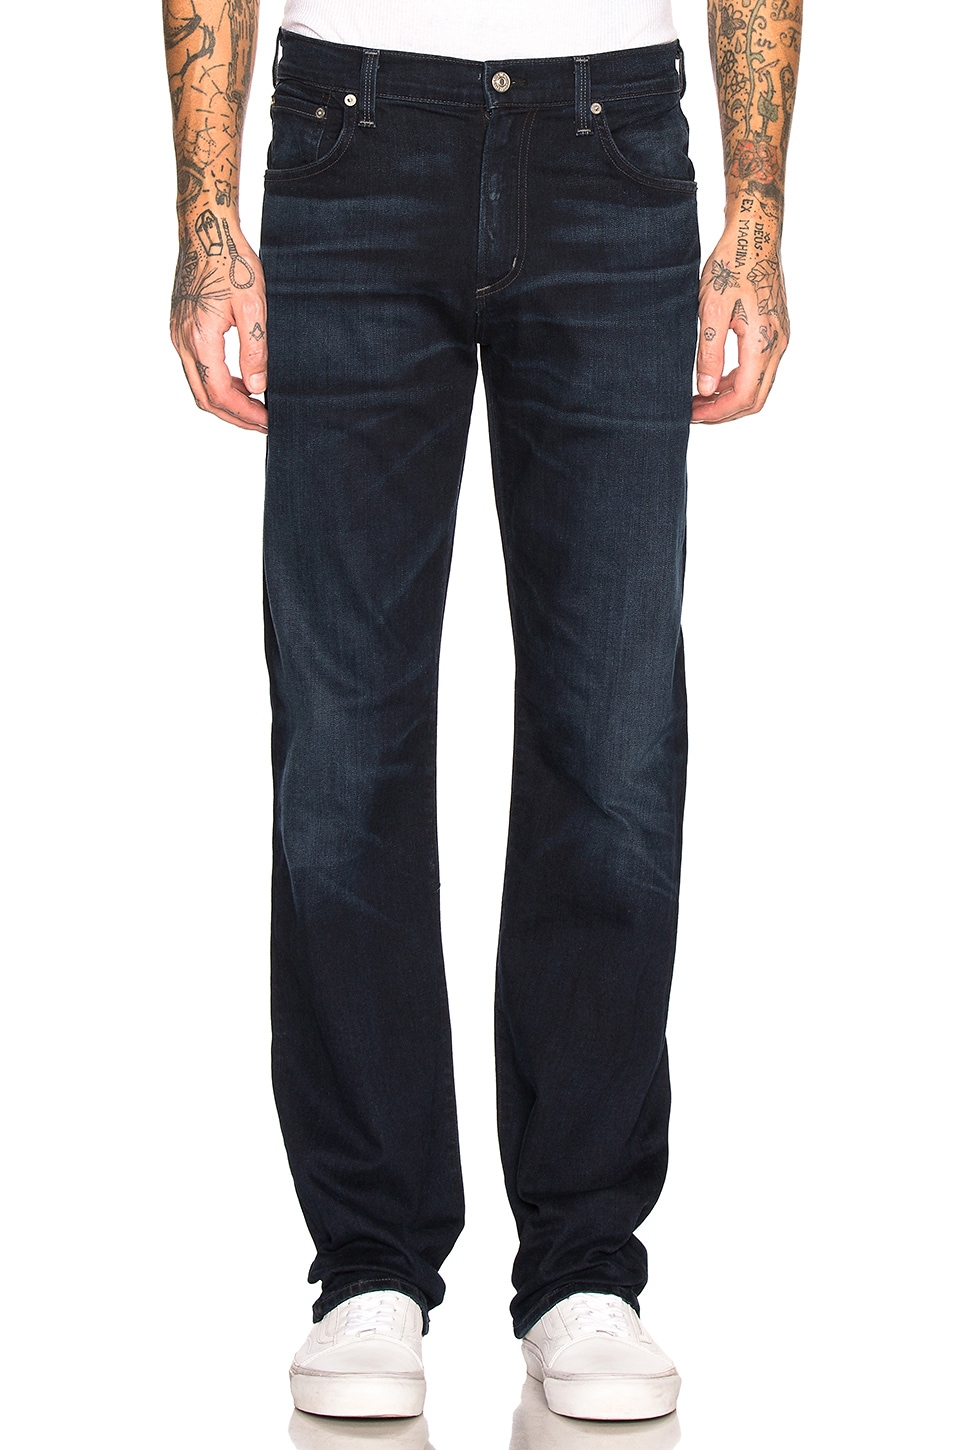 Citizens of Humanity Sid Classic Straight Jean in Miles | REVOLVE